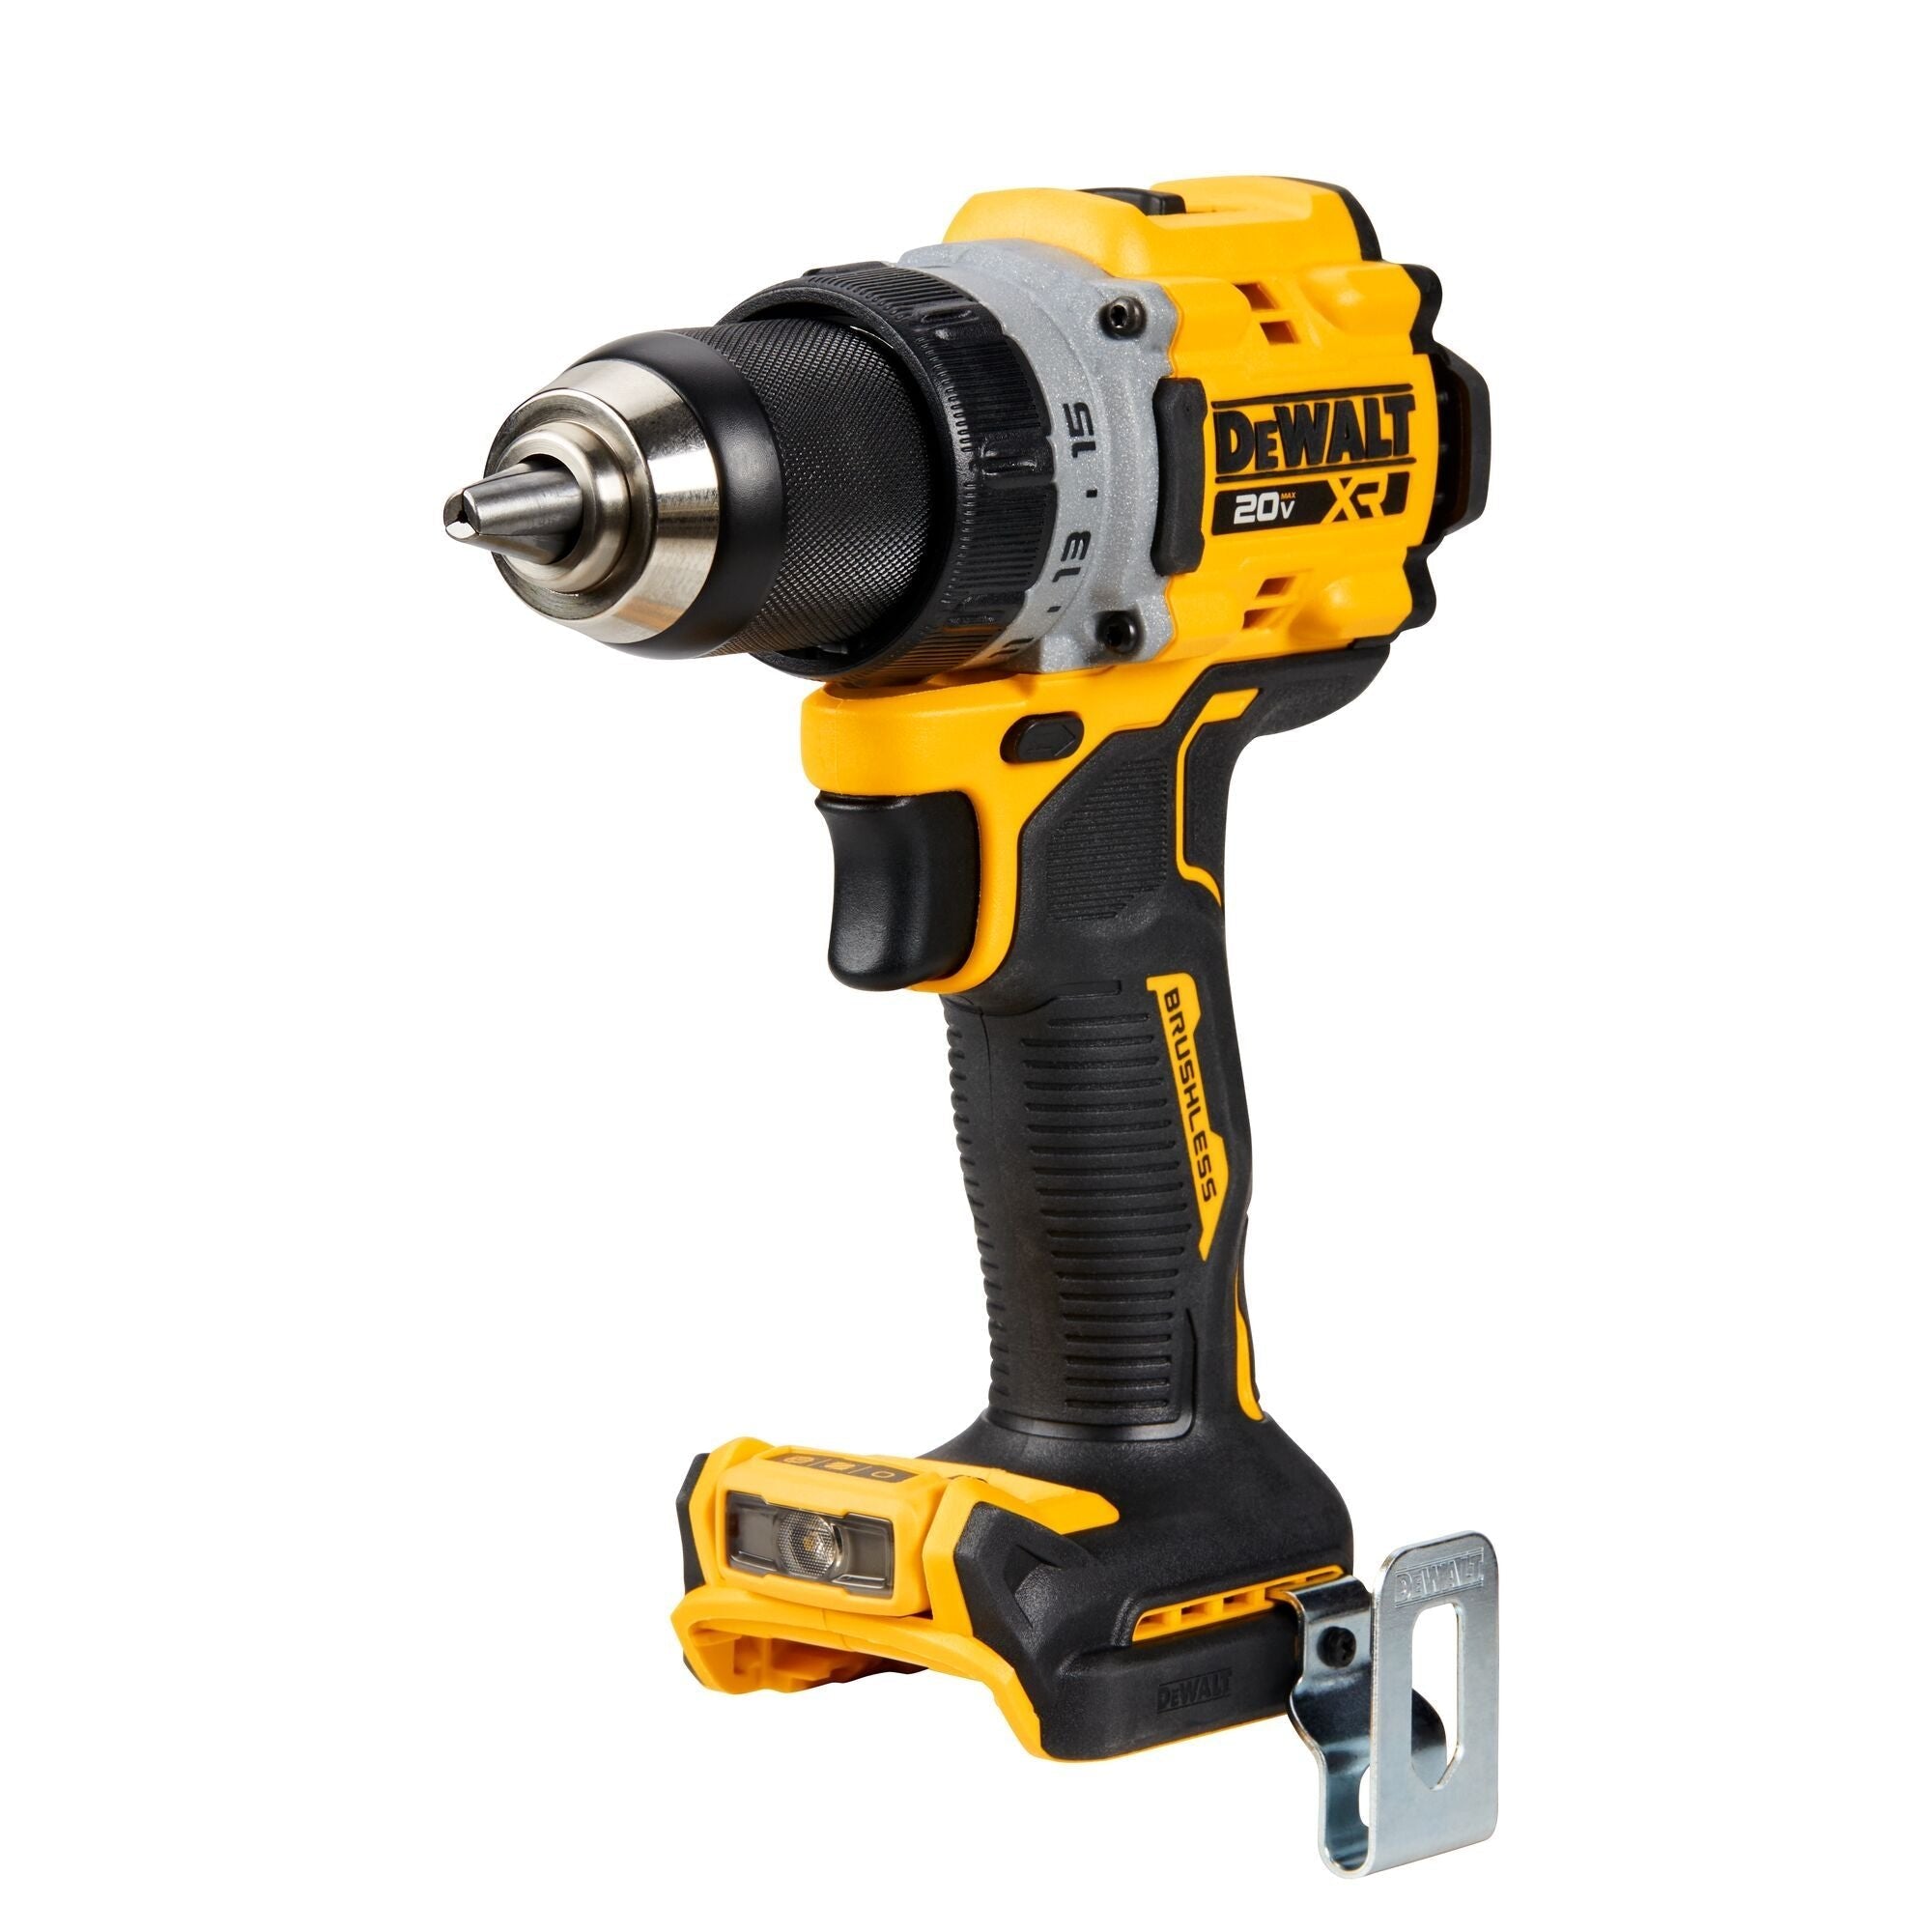 » DEWALT DCD800B 20V MAX* XR® Brushless Cordless 1/2 in. Drill/Driver (Tool Only) (100% off)